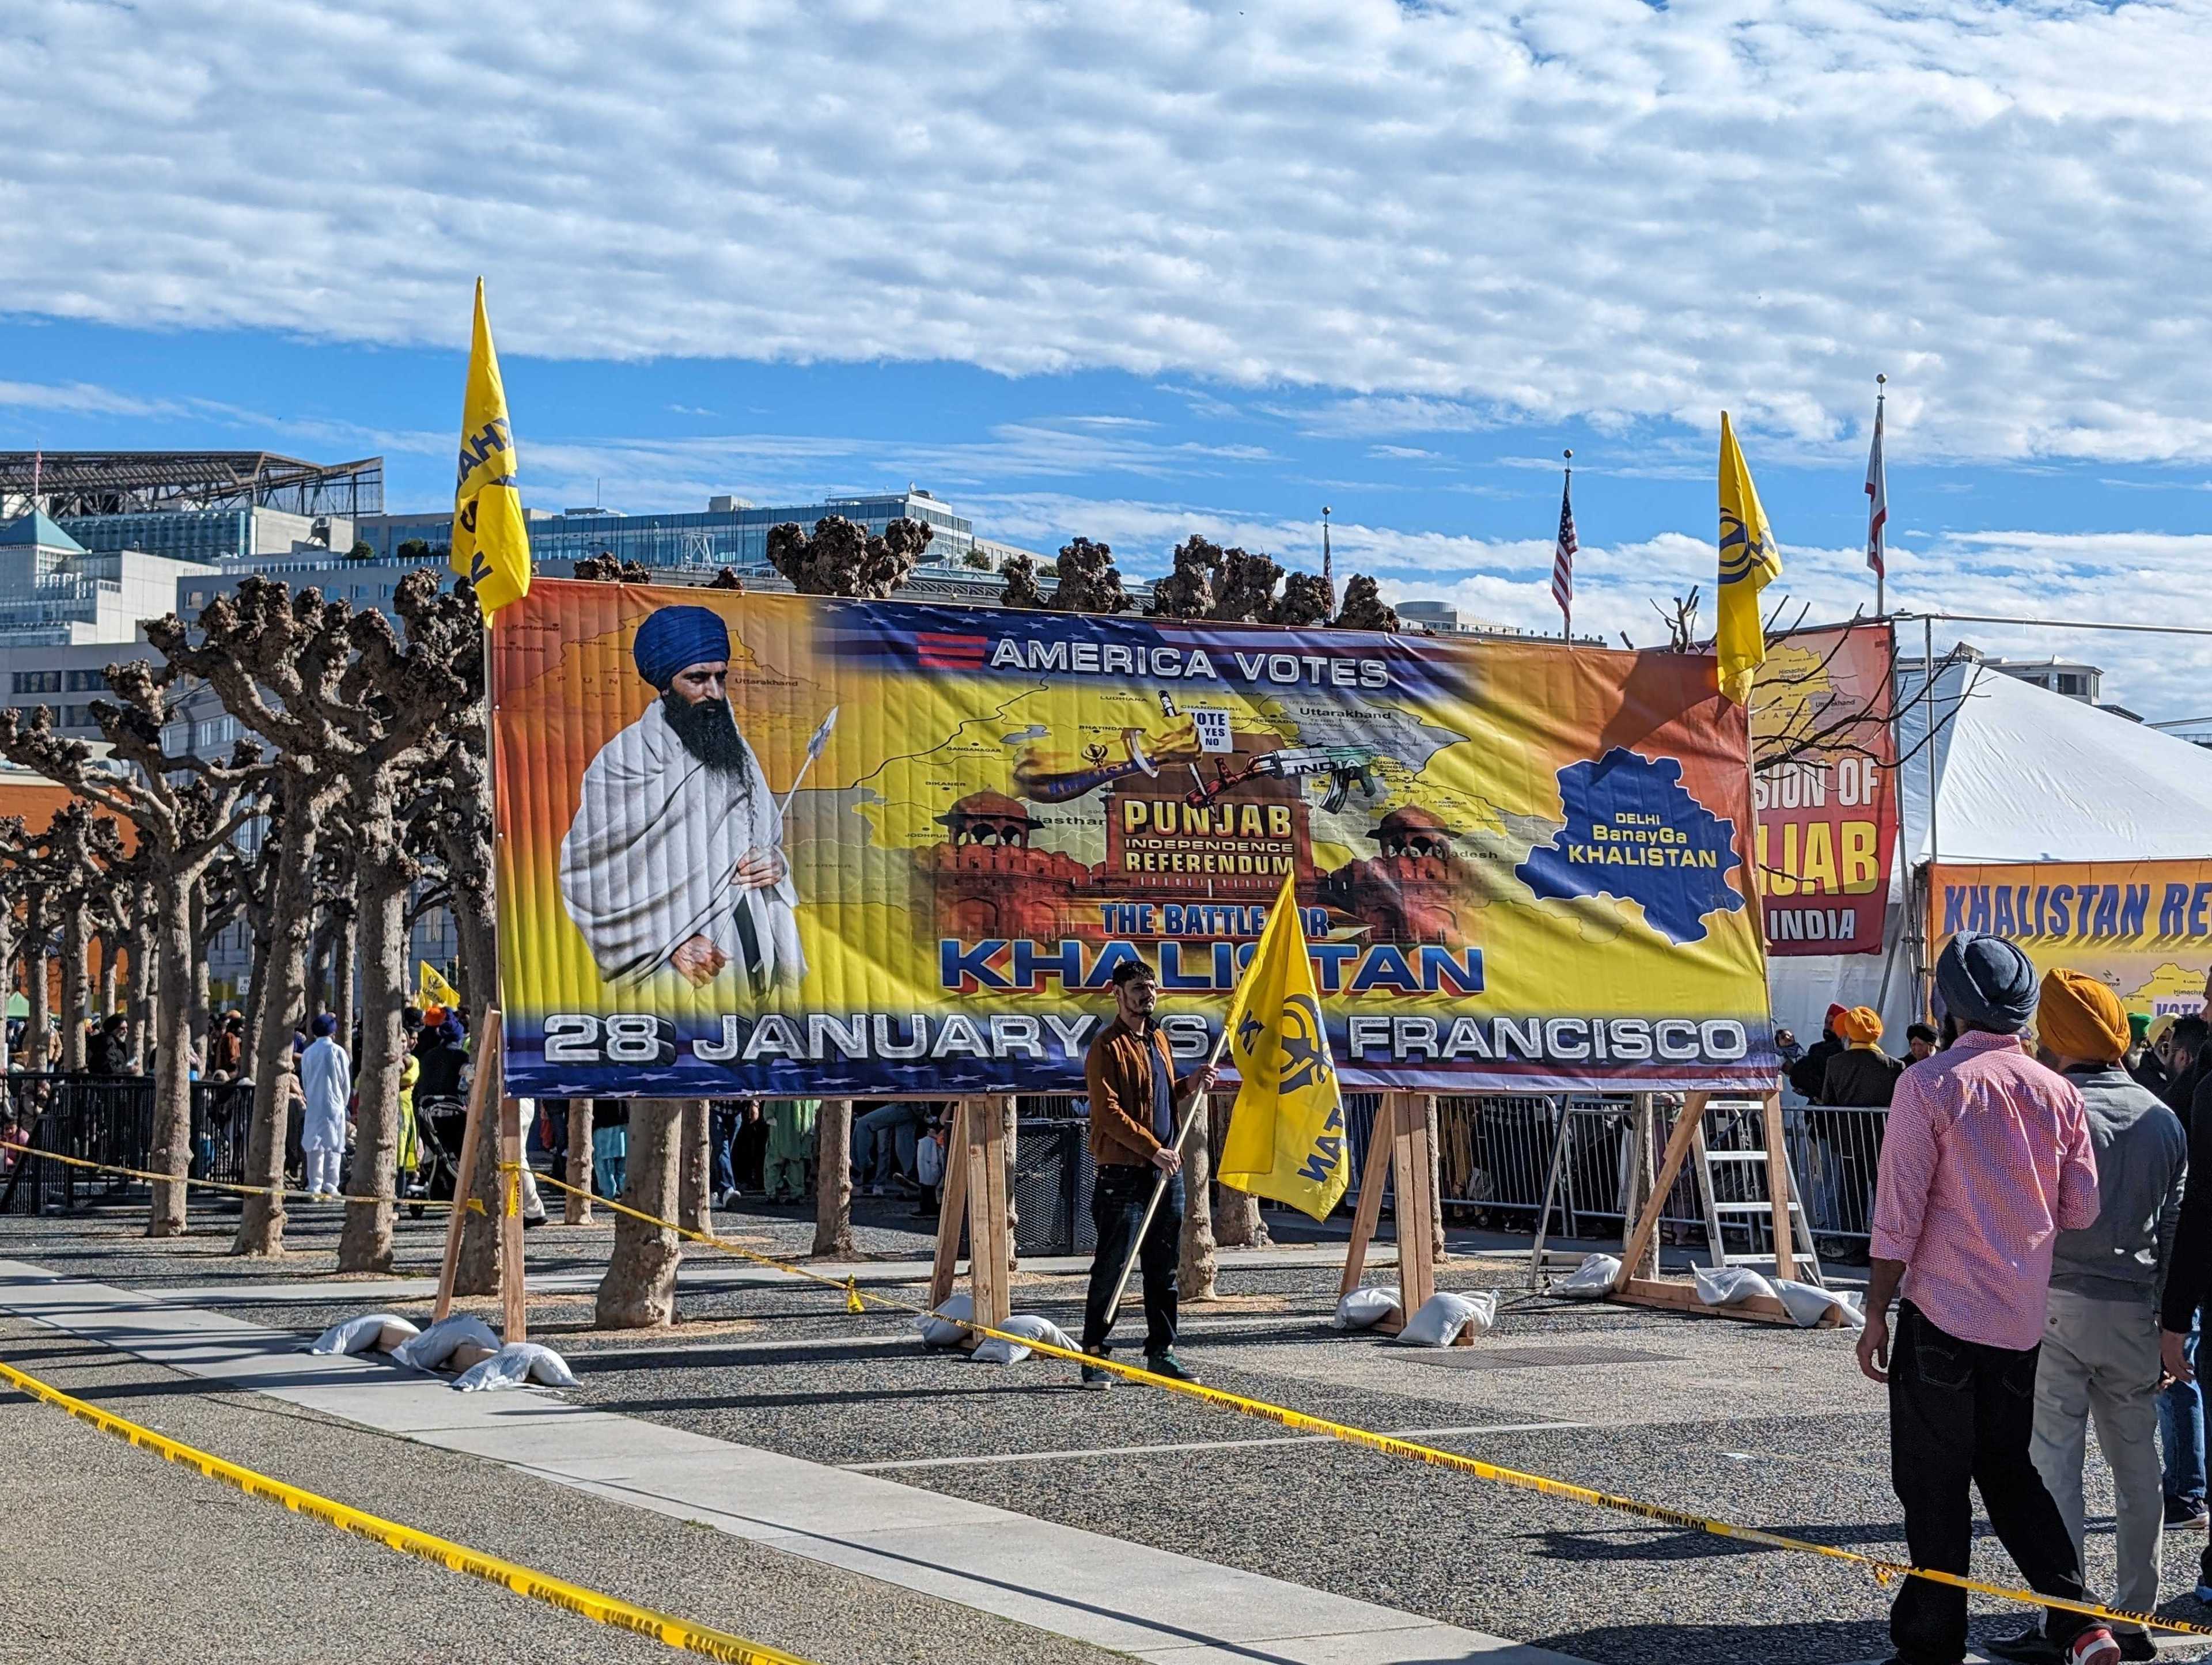 A man holds a yellow flag in front of a sign advertising a voting referendum at an outdoor public plaza.